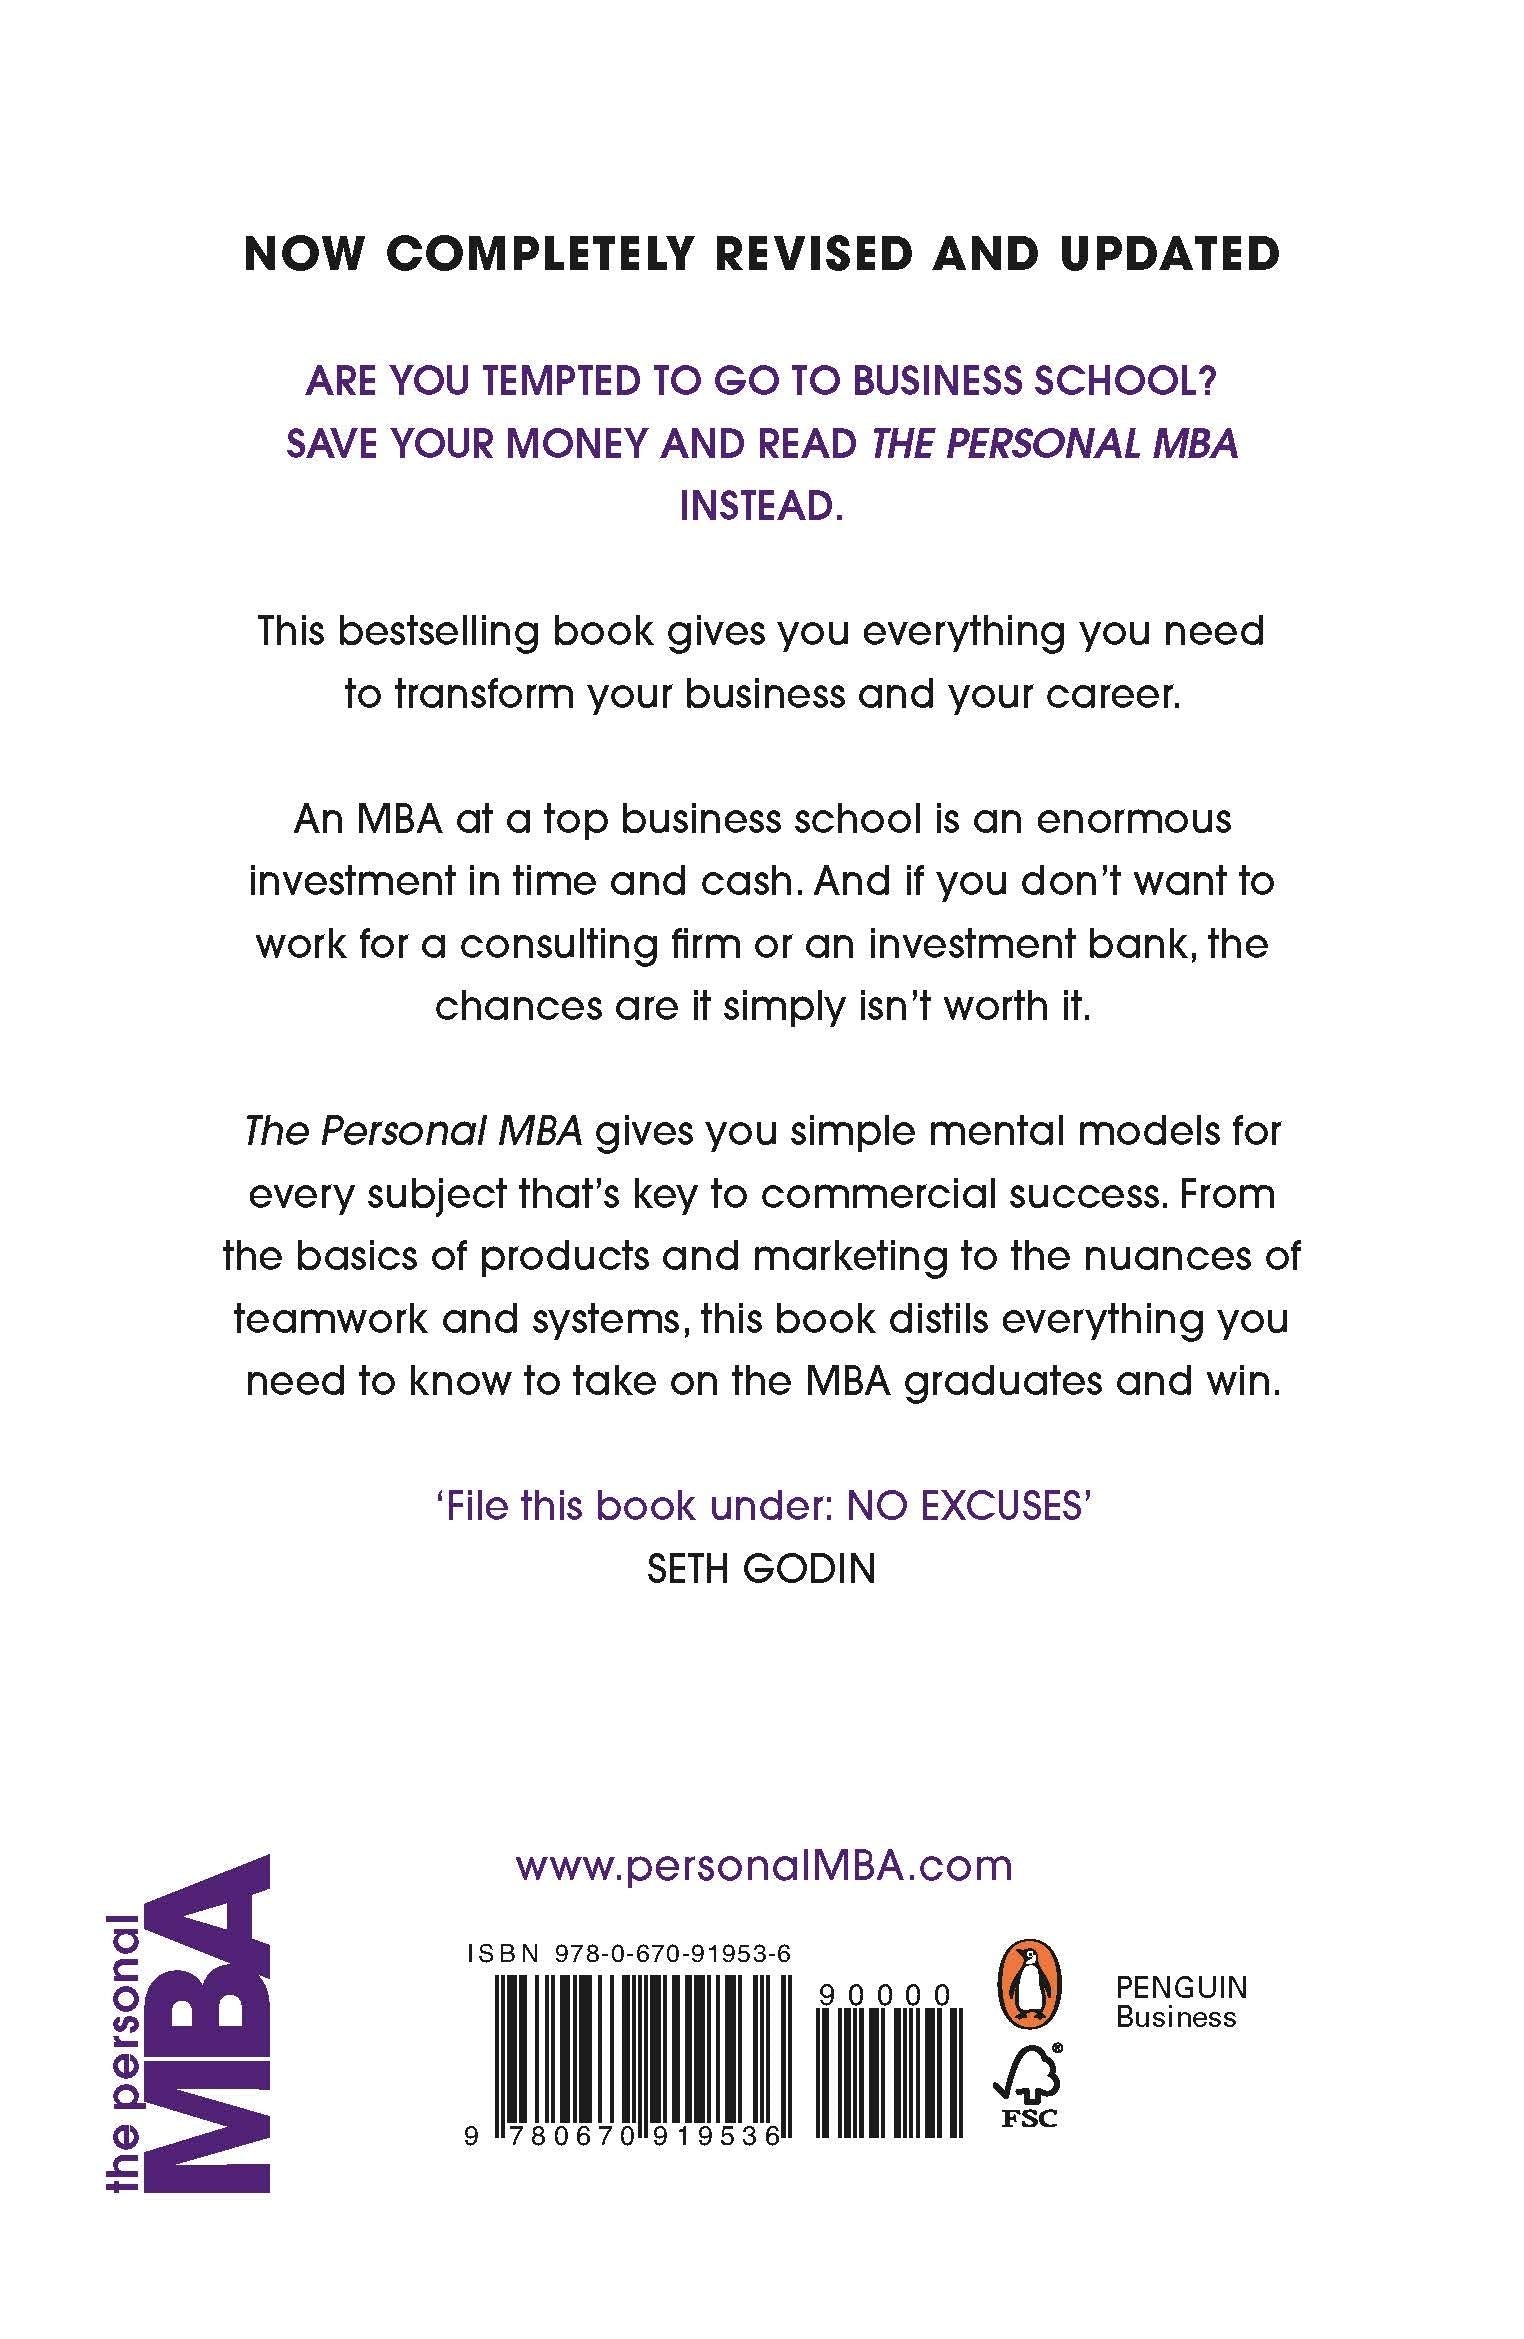 The Personal MBA: A World-Class Business Education in a Single Volume - The English Bookshop